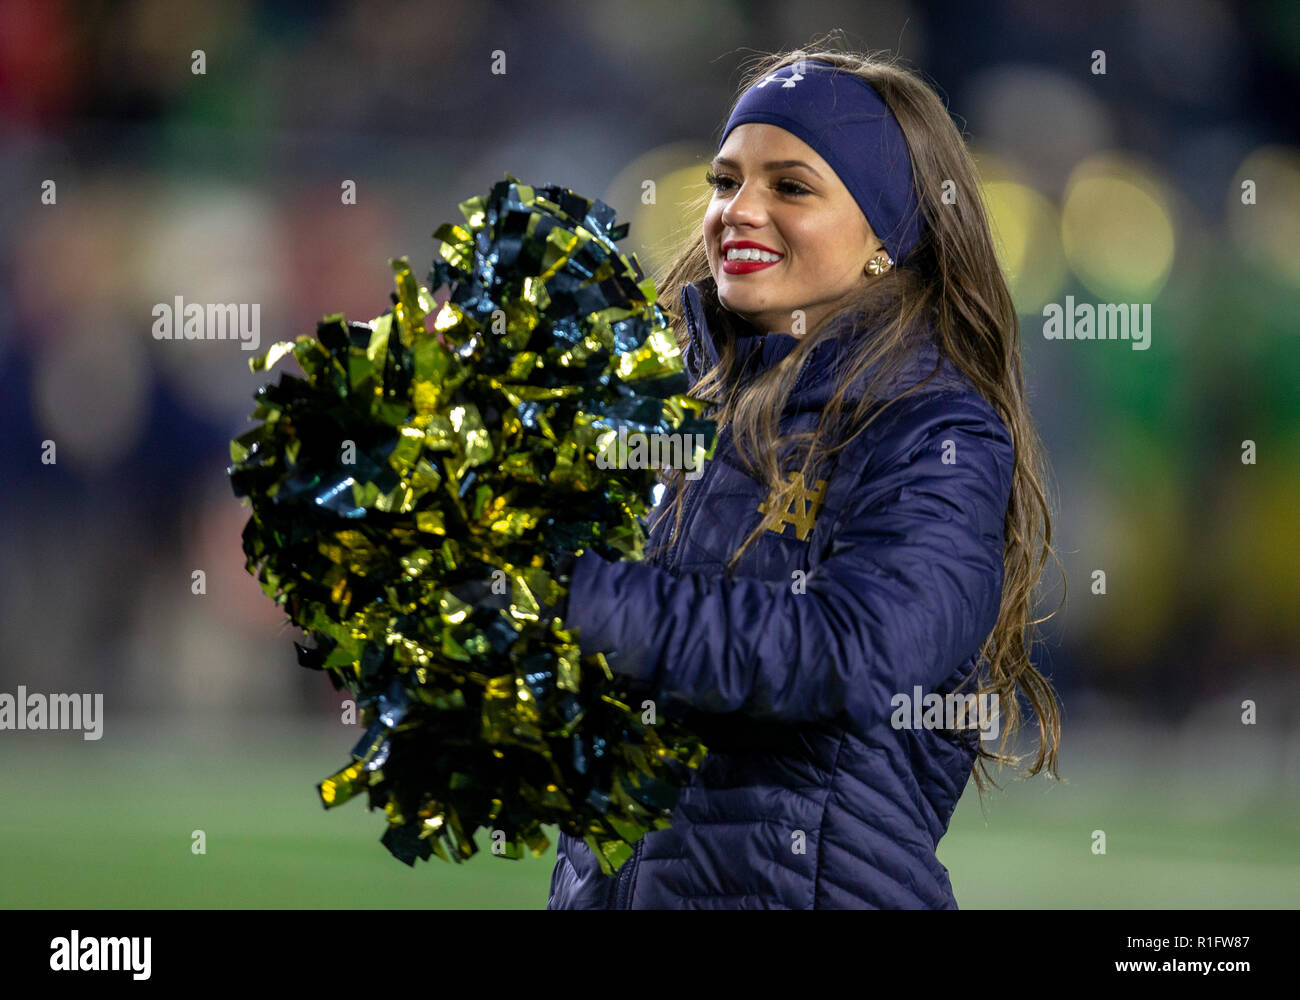 South Bend, Indiana, USA. 10th Nov, 2018. Notre Dame cheerleader performs during NCAA football game action between the Florida State Seminoles and the Notre Dame Fighting Irish at Notre Dame Stadium in South Bend, Indiana. Notre Dame defeated Florida State 42-13. John Mersits/CSM/Alamy Live News Stock Photo